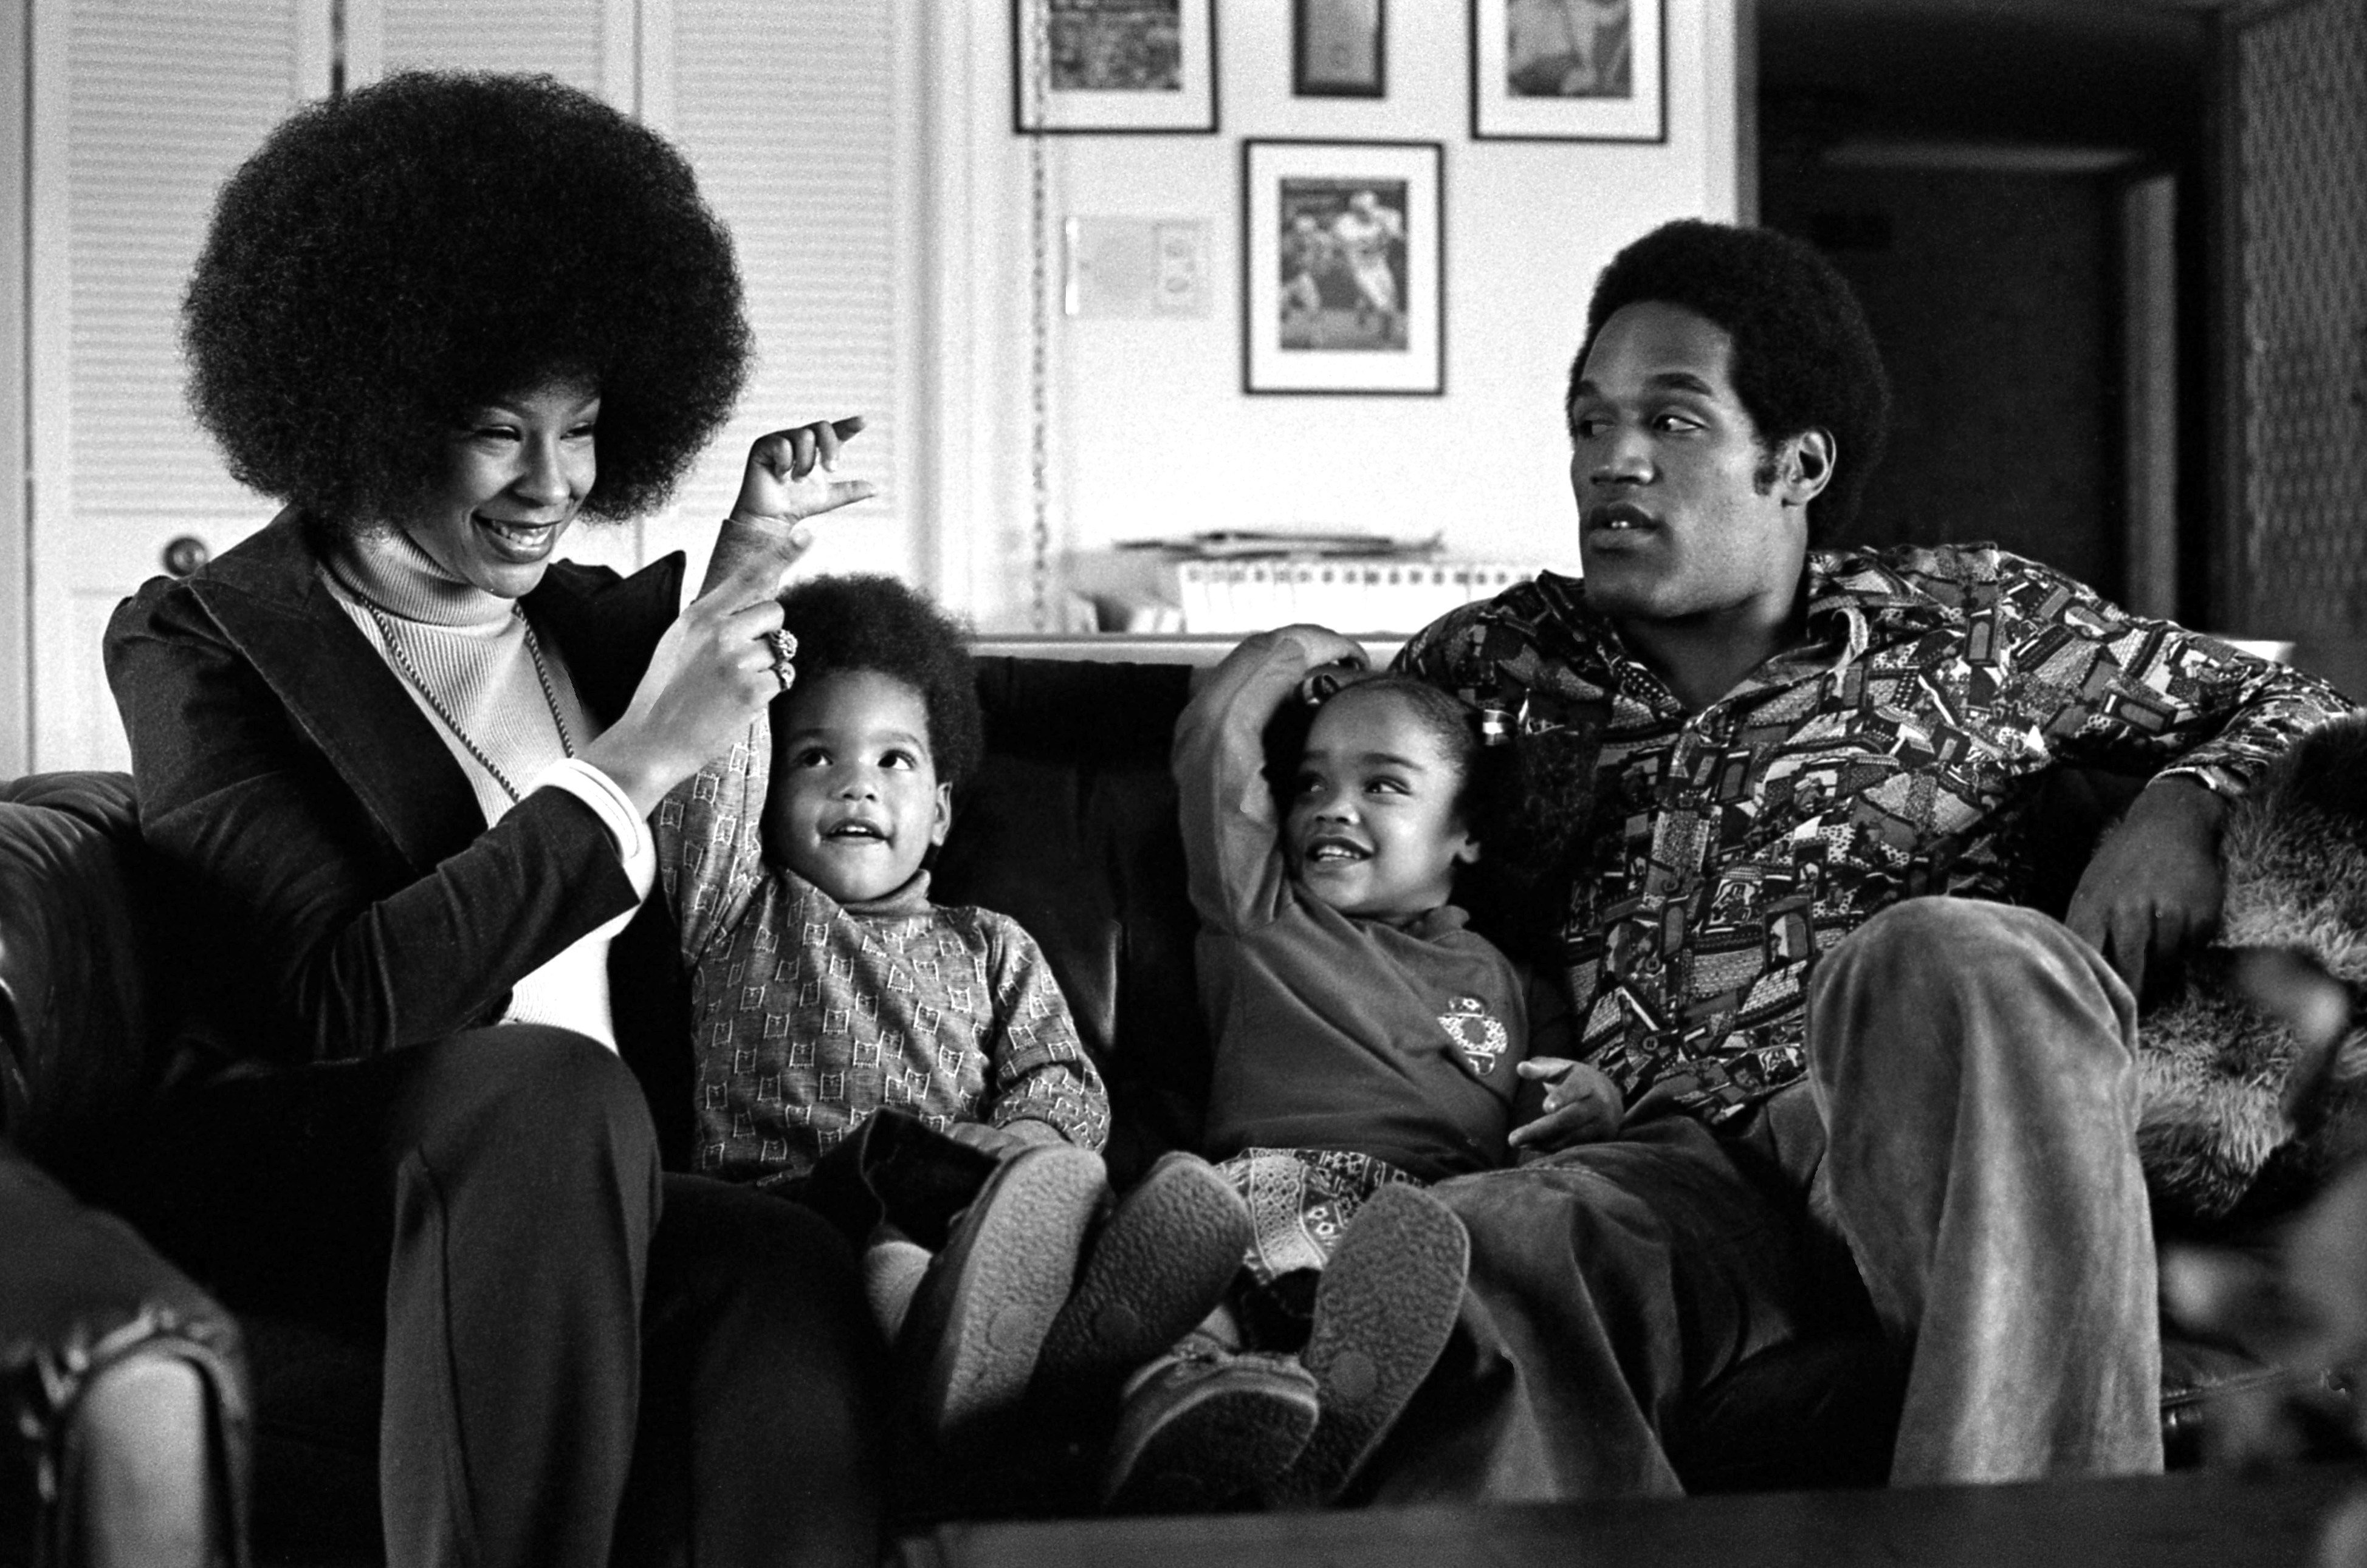 O.J. Simspson sits with his ex-wife Marguerite Whitley and children, Arnelle and Jason, during a portrait session on January 8, 1973, in Los Angeles | Source: Getty Images